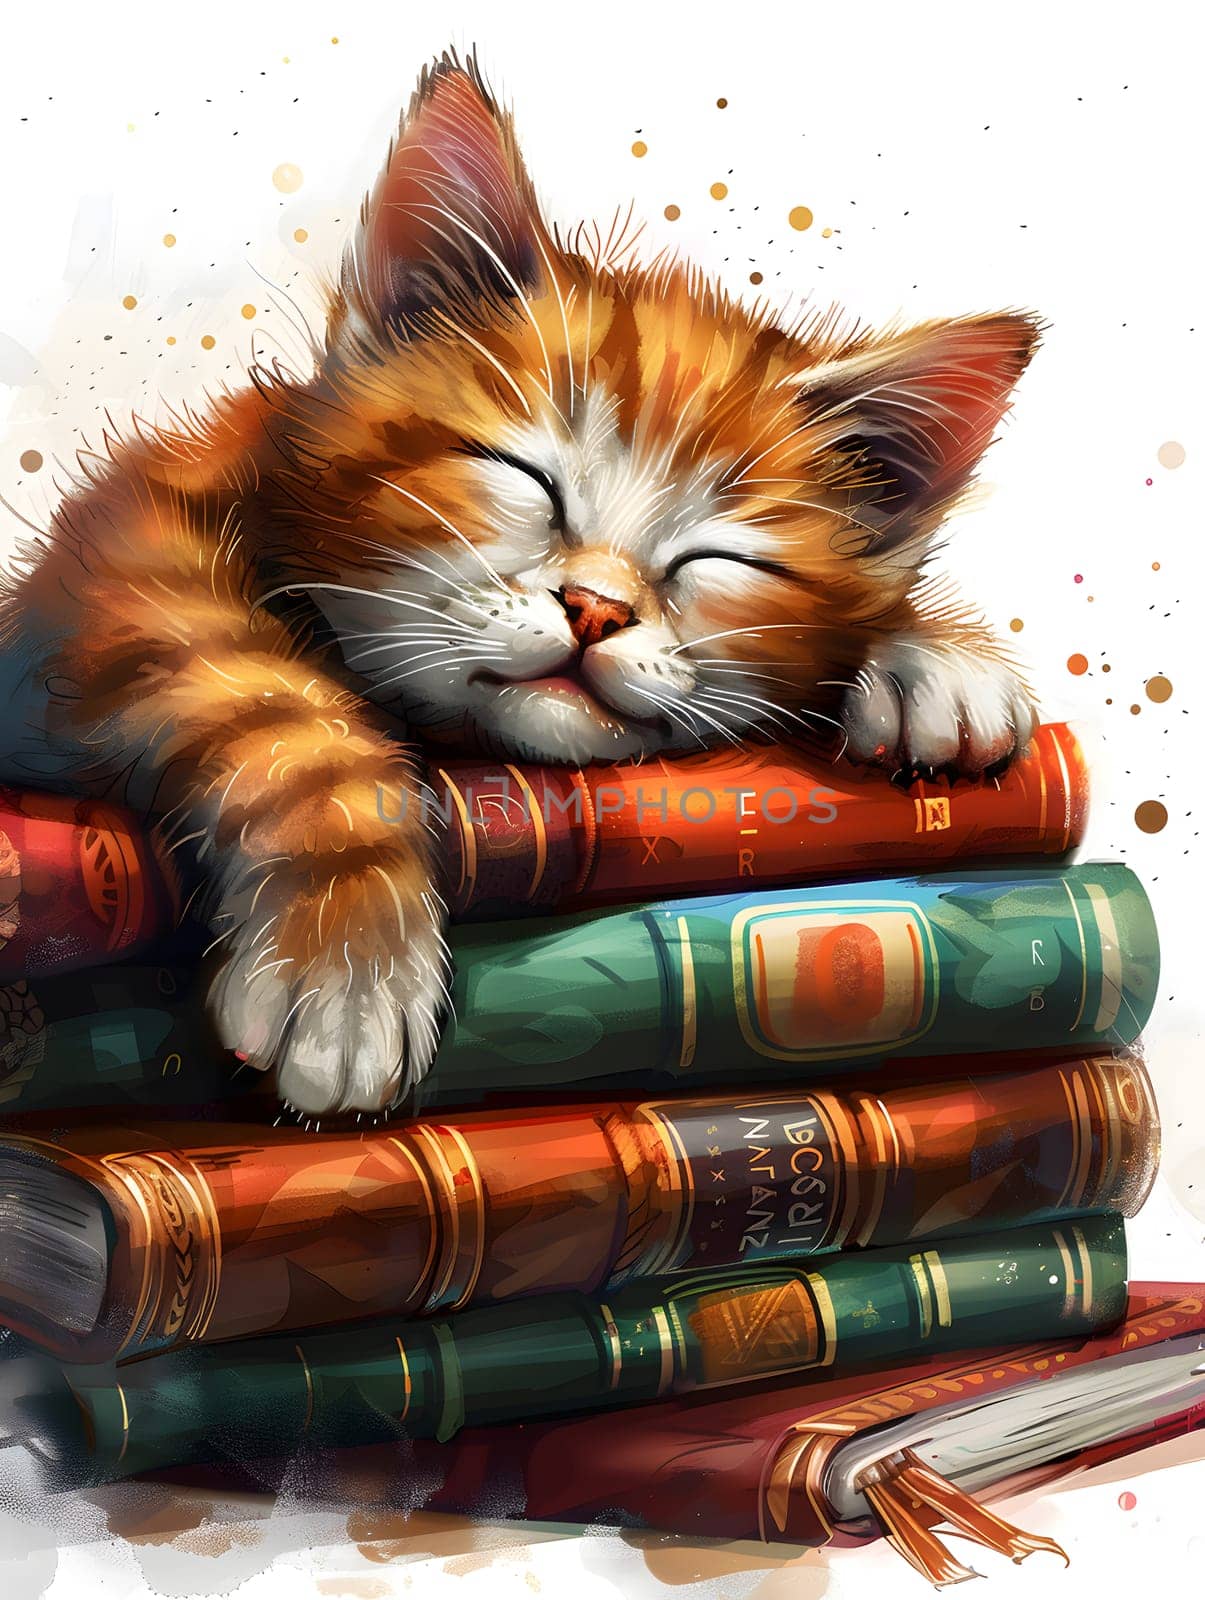 A small Felidae with whiskers napping on art publications by Nadtochiy